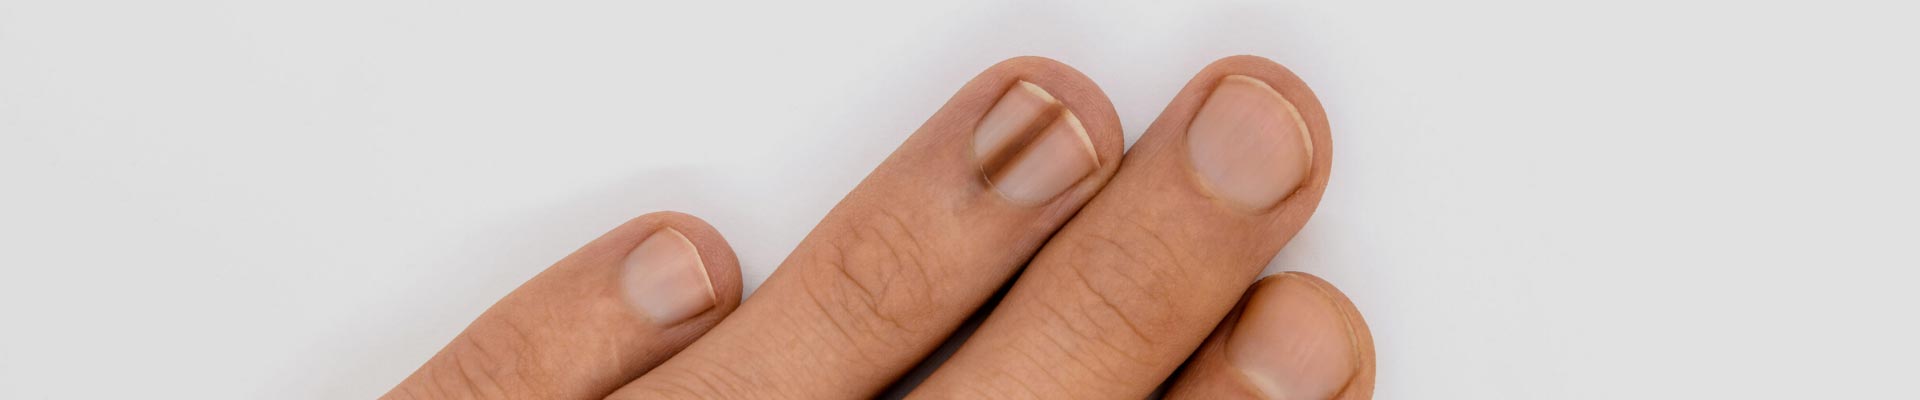 Is it dangerous to have a black mark on your nail? - Quora